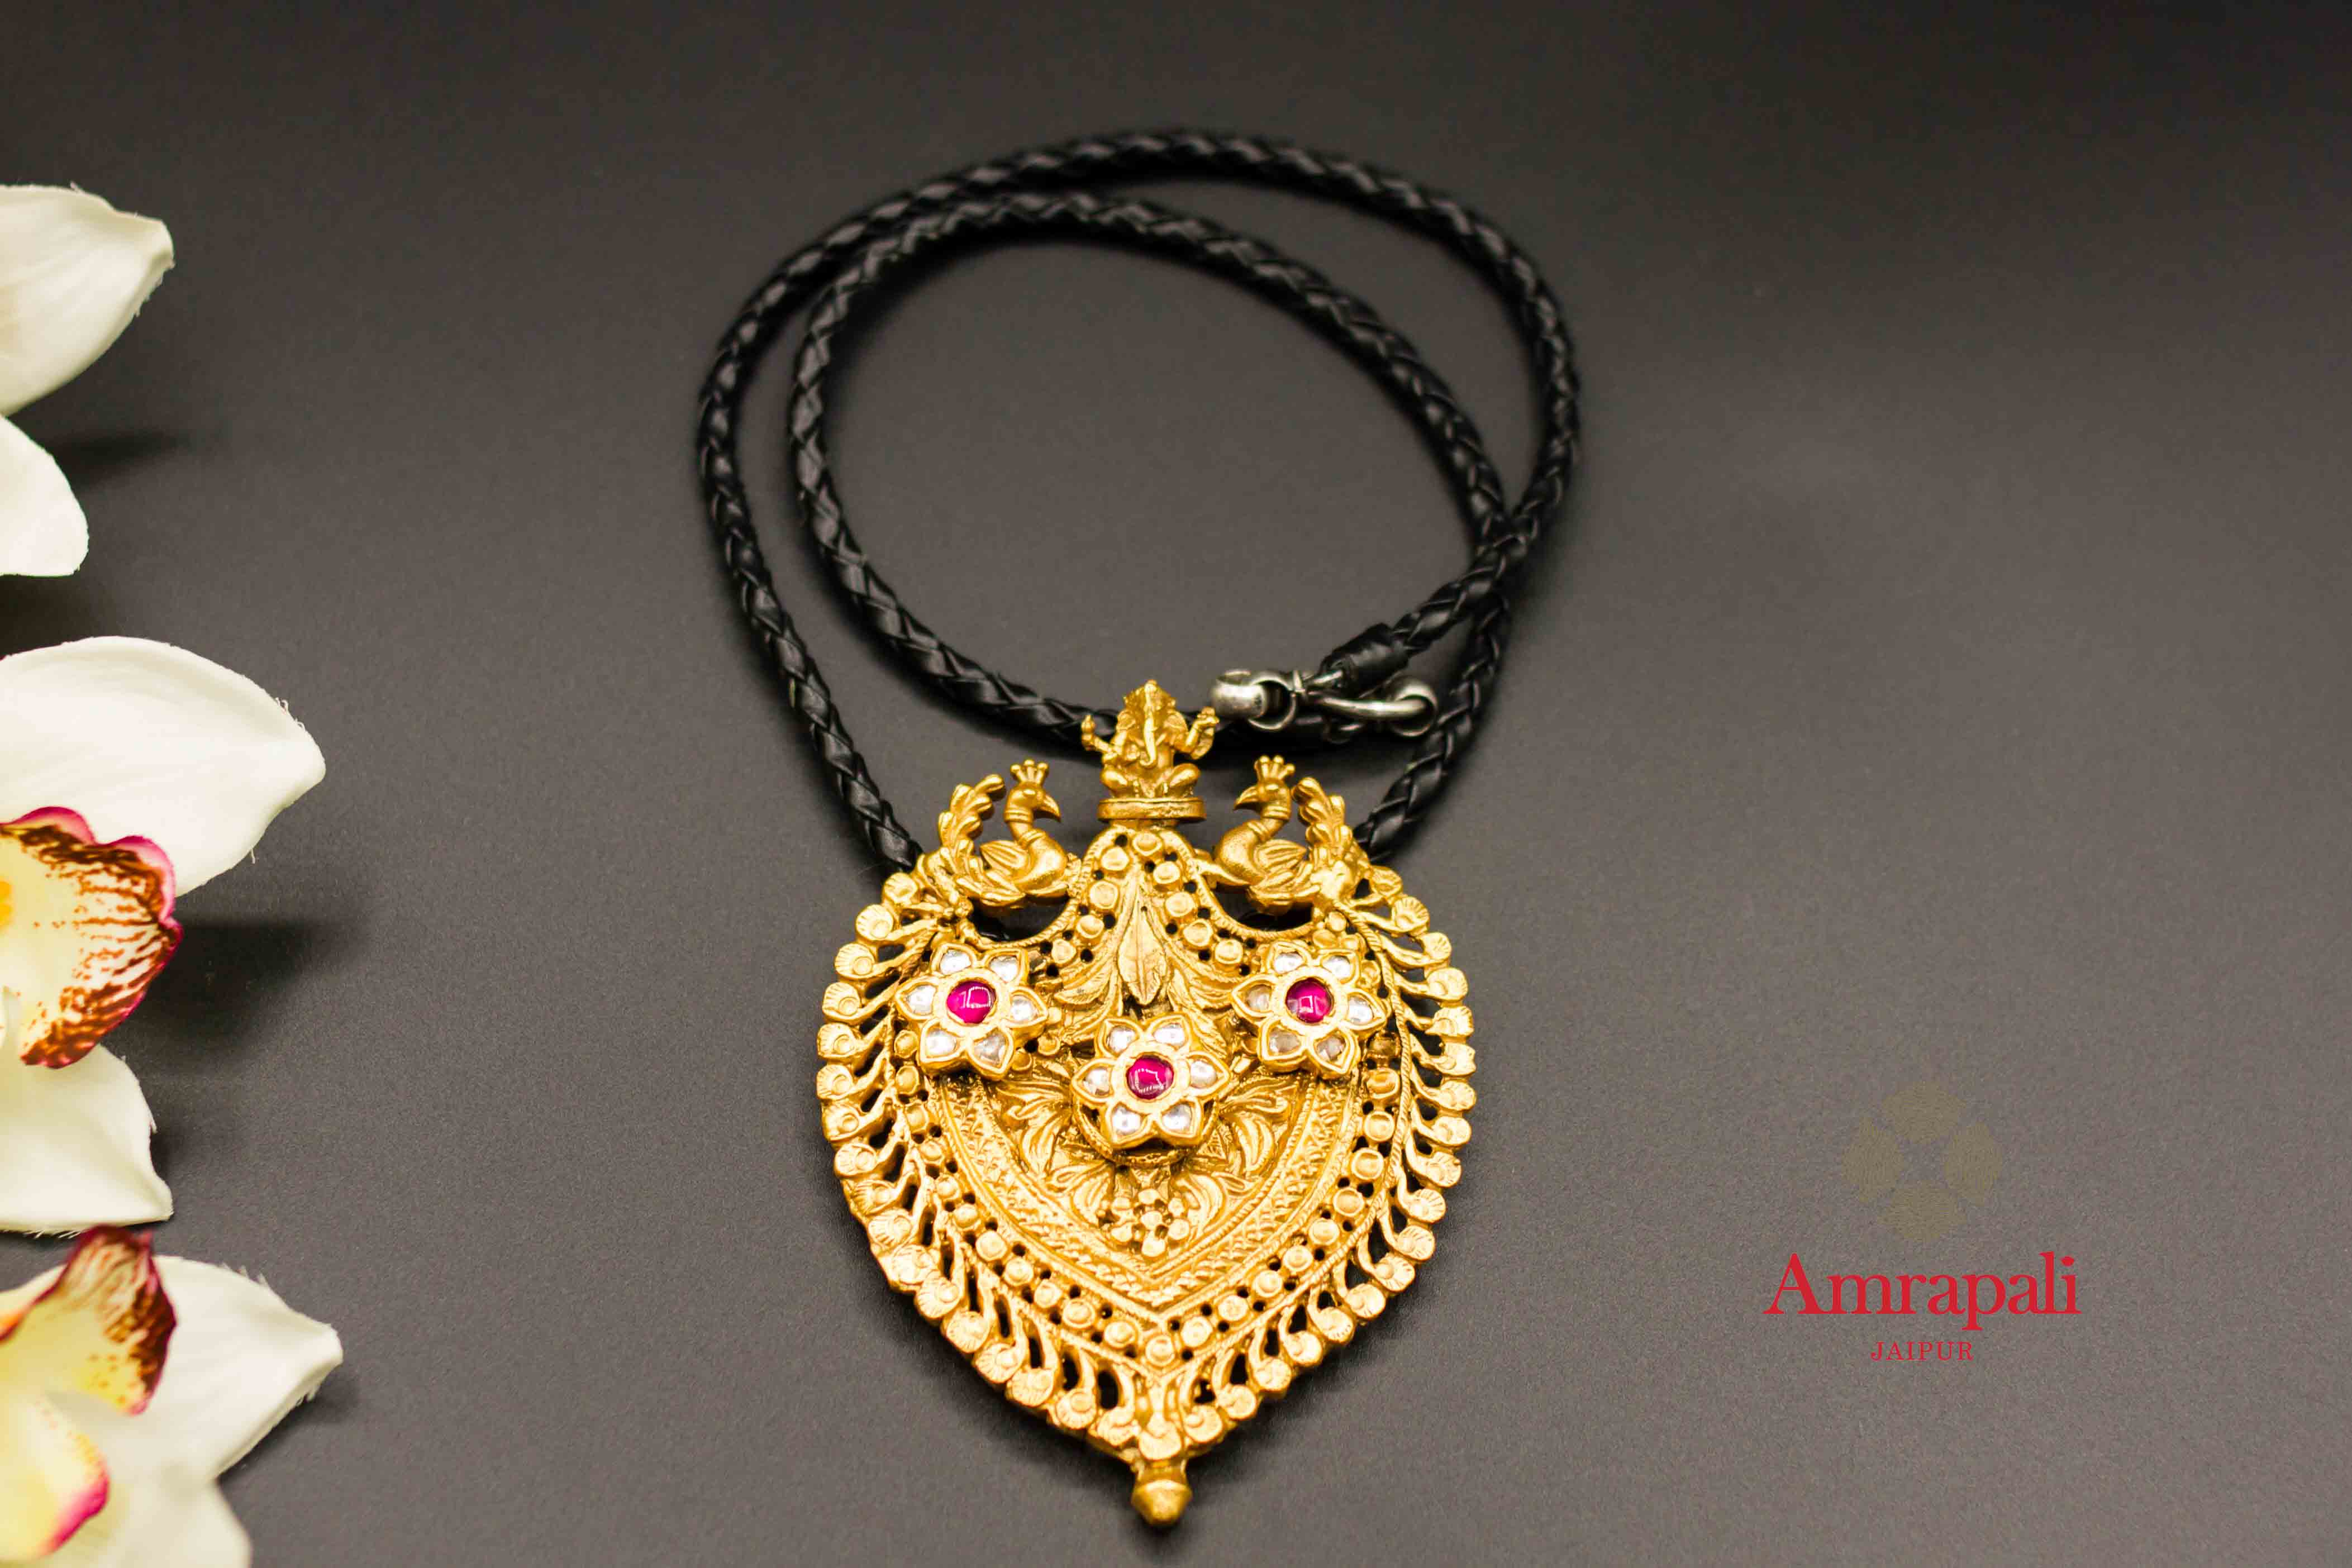 Buy Amrapali silver gold plated Ganesha peacock glass pendant necklace online in USA. Raise your ethnic style quotient on special occasions with exquisite Indian jewelry from Pure Elegance Indian clothing store in USA. Enhance your Indian look with silver gold plated jewelry, fashion jewelry available online.-flatlay